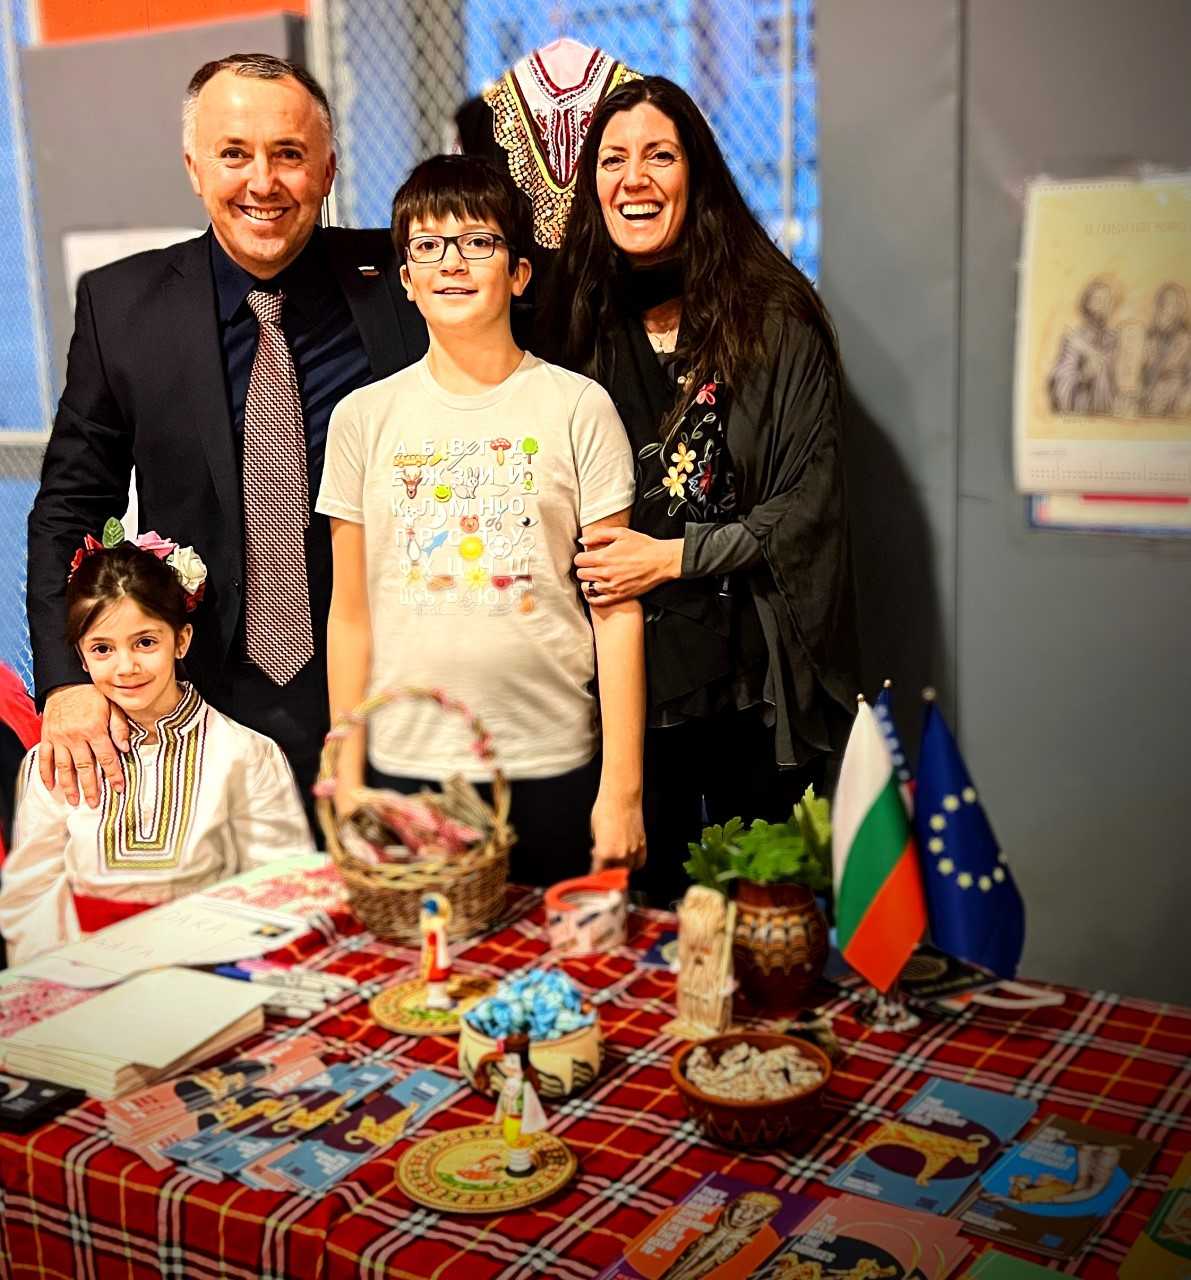 Participation of Bulgaria in an International Fair at a Public School in New York